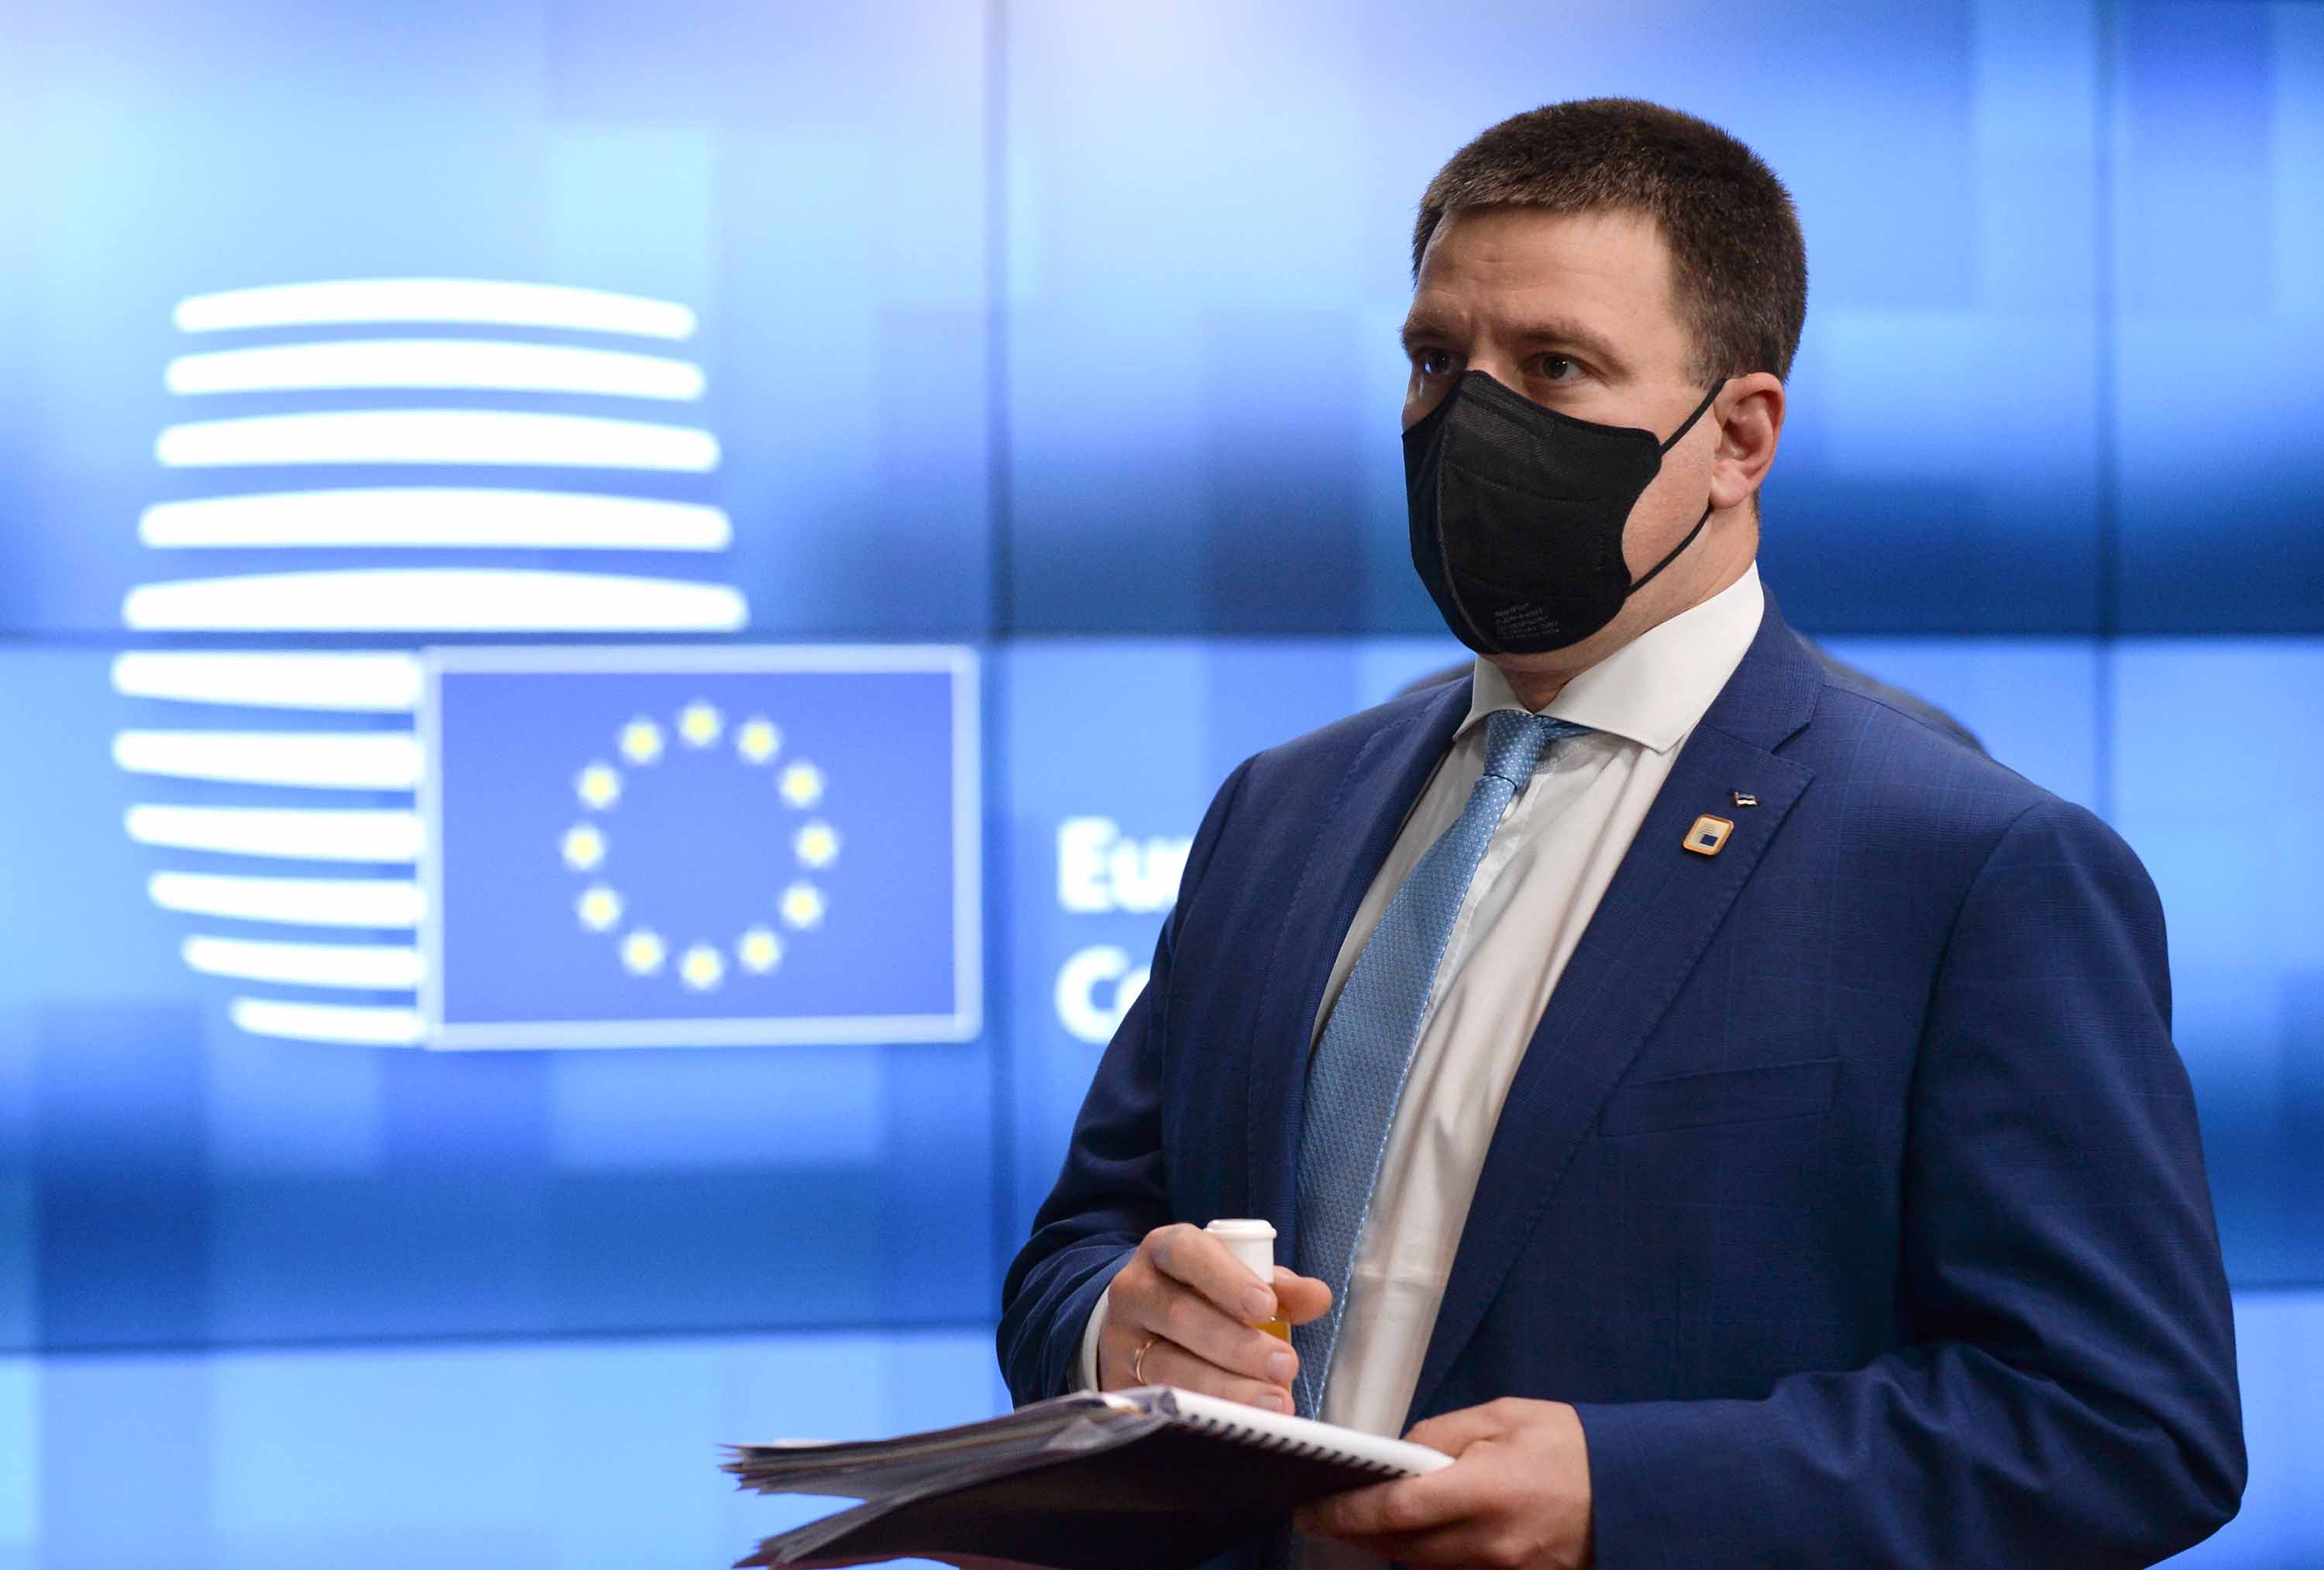 Estonian Prime Minister Juri Ratas is pictured during a summit at the European Council Building in Brussels, on October 16.